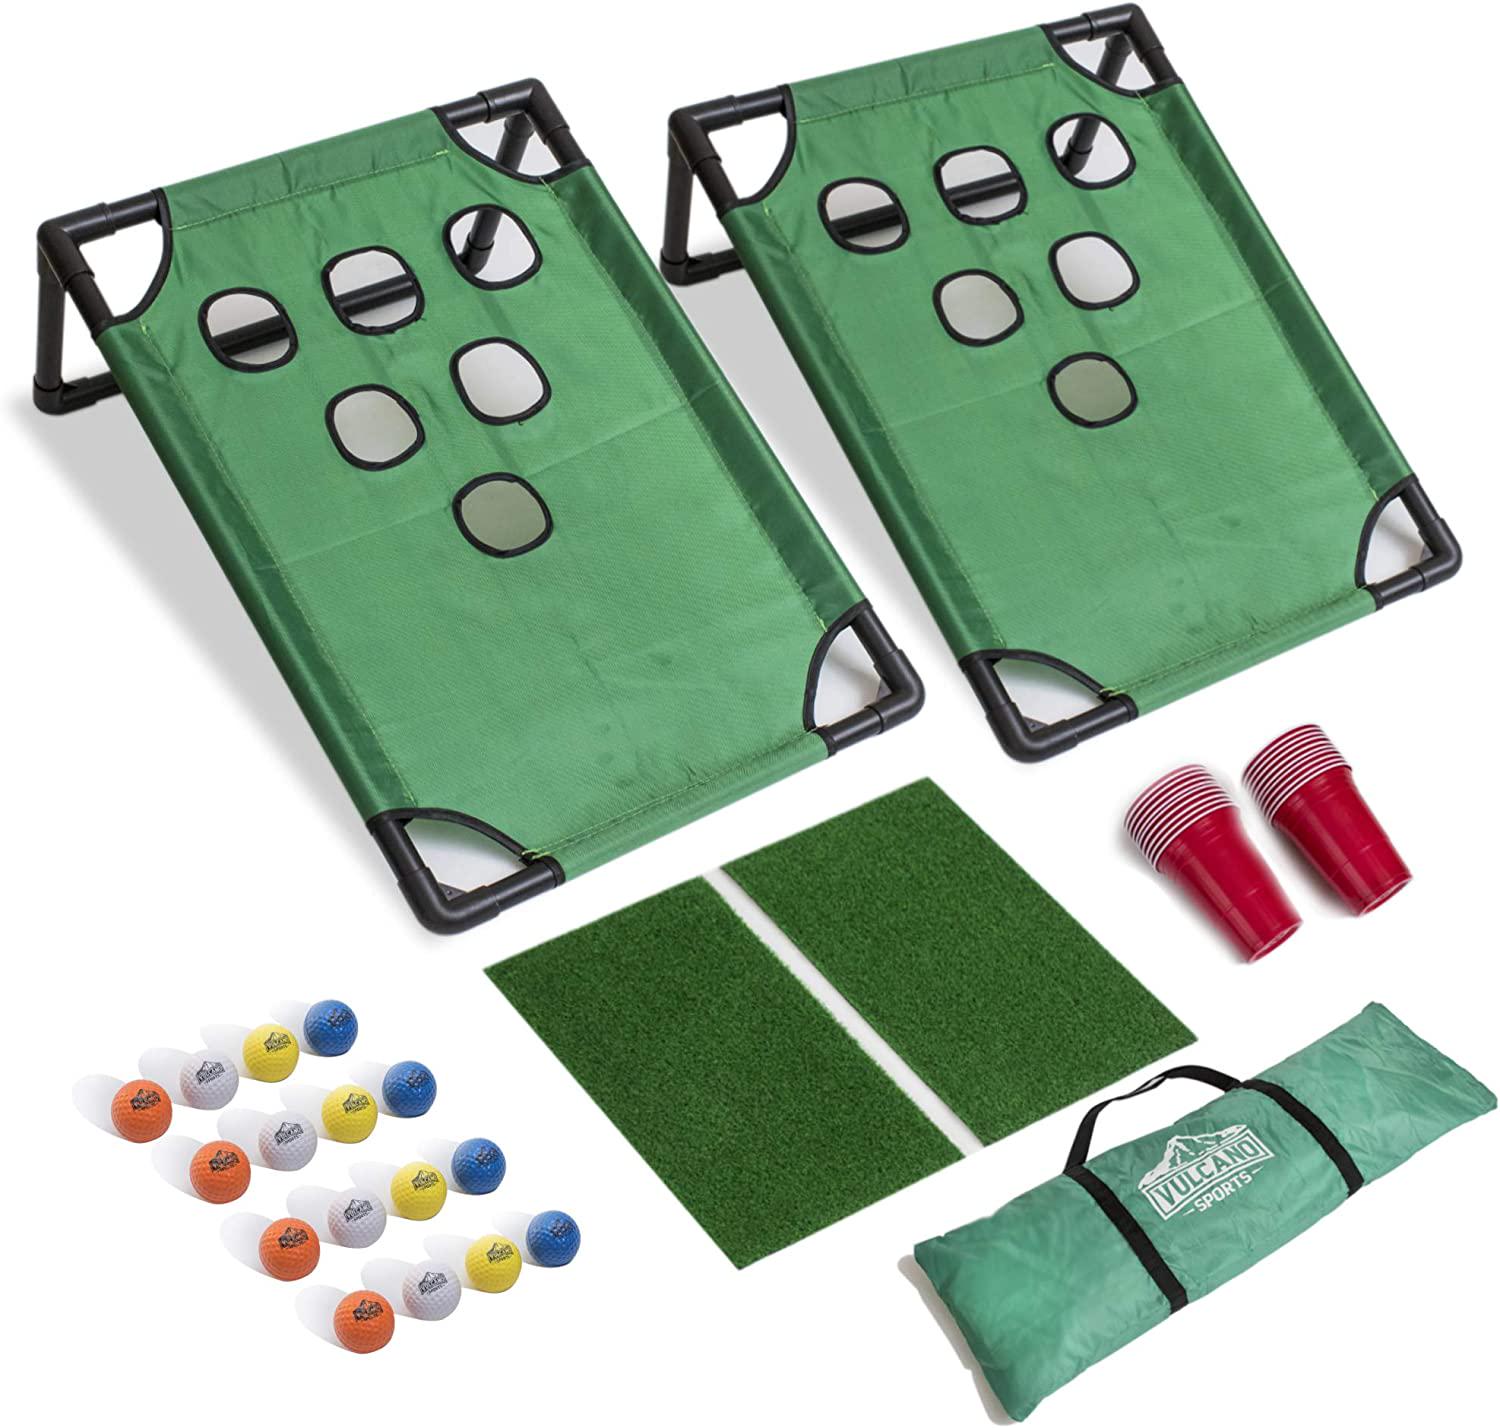 VULCANO SPORTS, Golf Pong Game Set, Best in Outdoor Games, Backyard Games for Adults, Golf Chipping Game, Golf Gifts for Men, Best in Yard Games, Perfect Golf Gift.